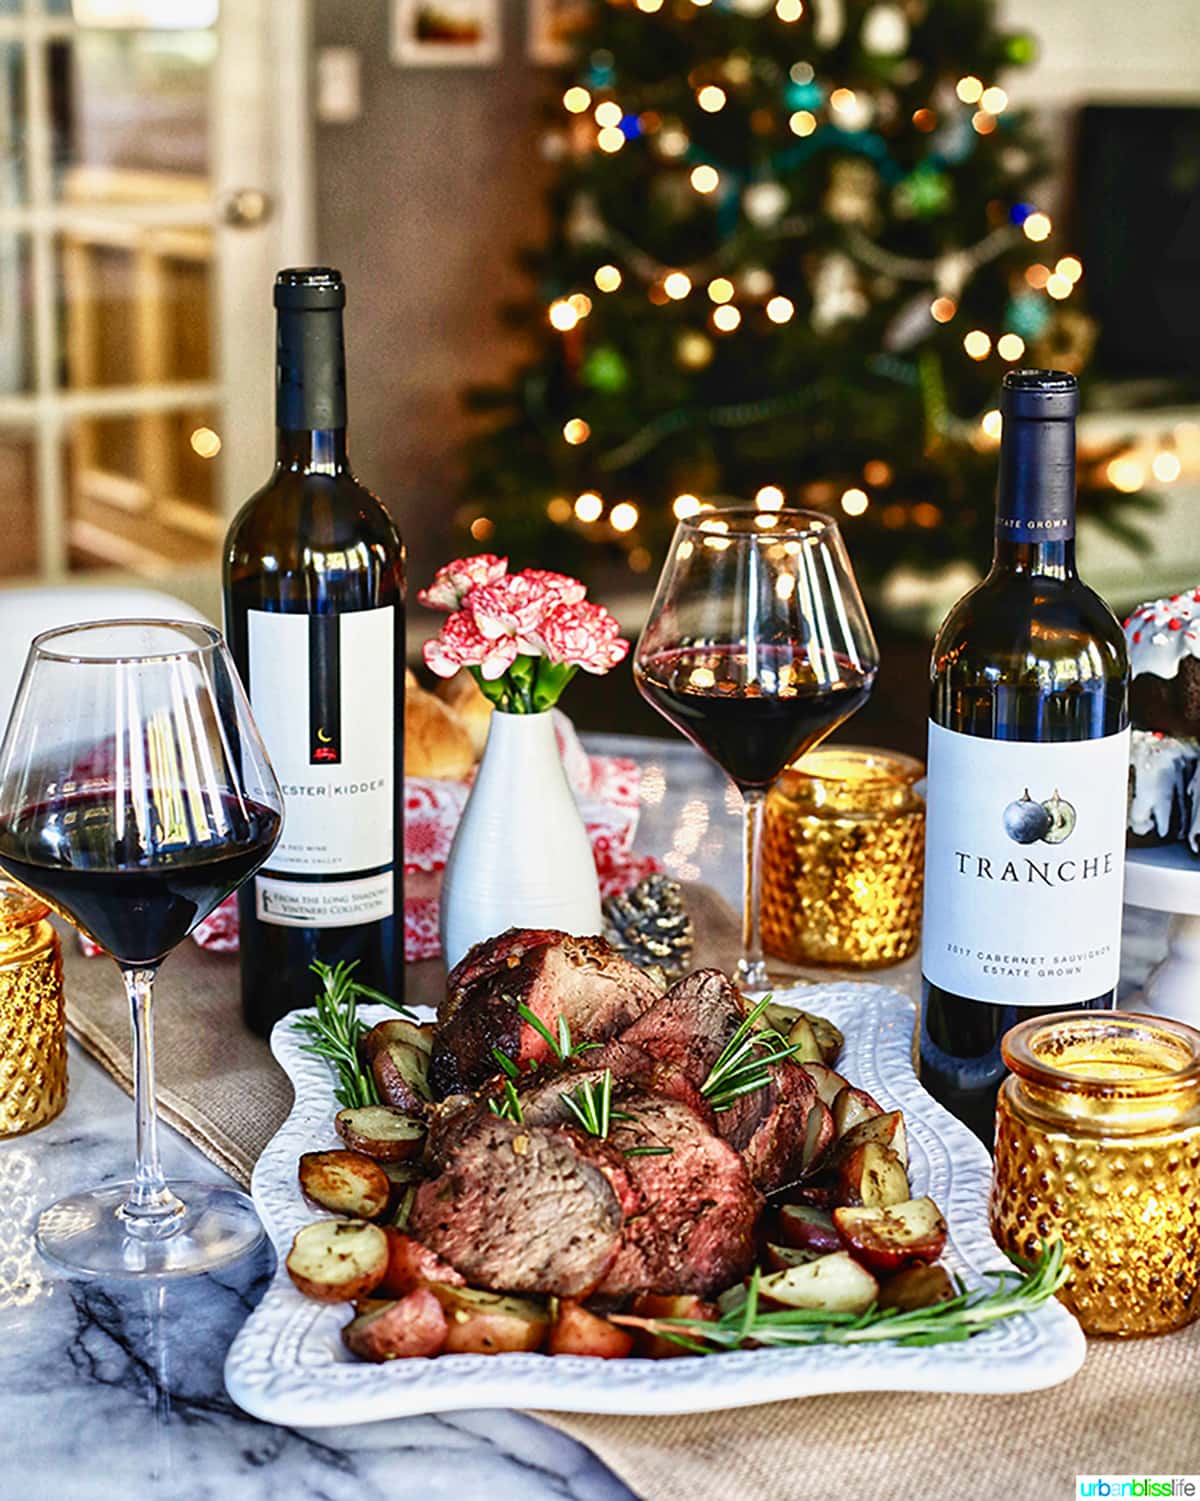 red wine bottles on a table for Thanksgiving Christmas holiday scene with roast and potatoes.